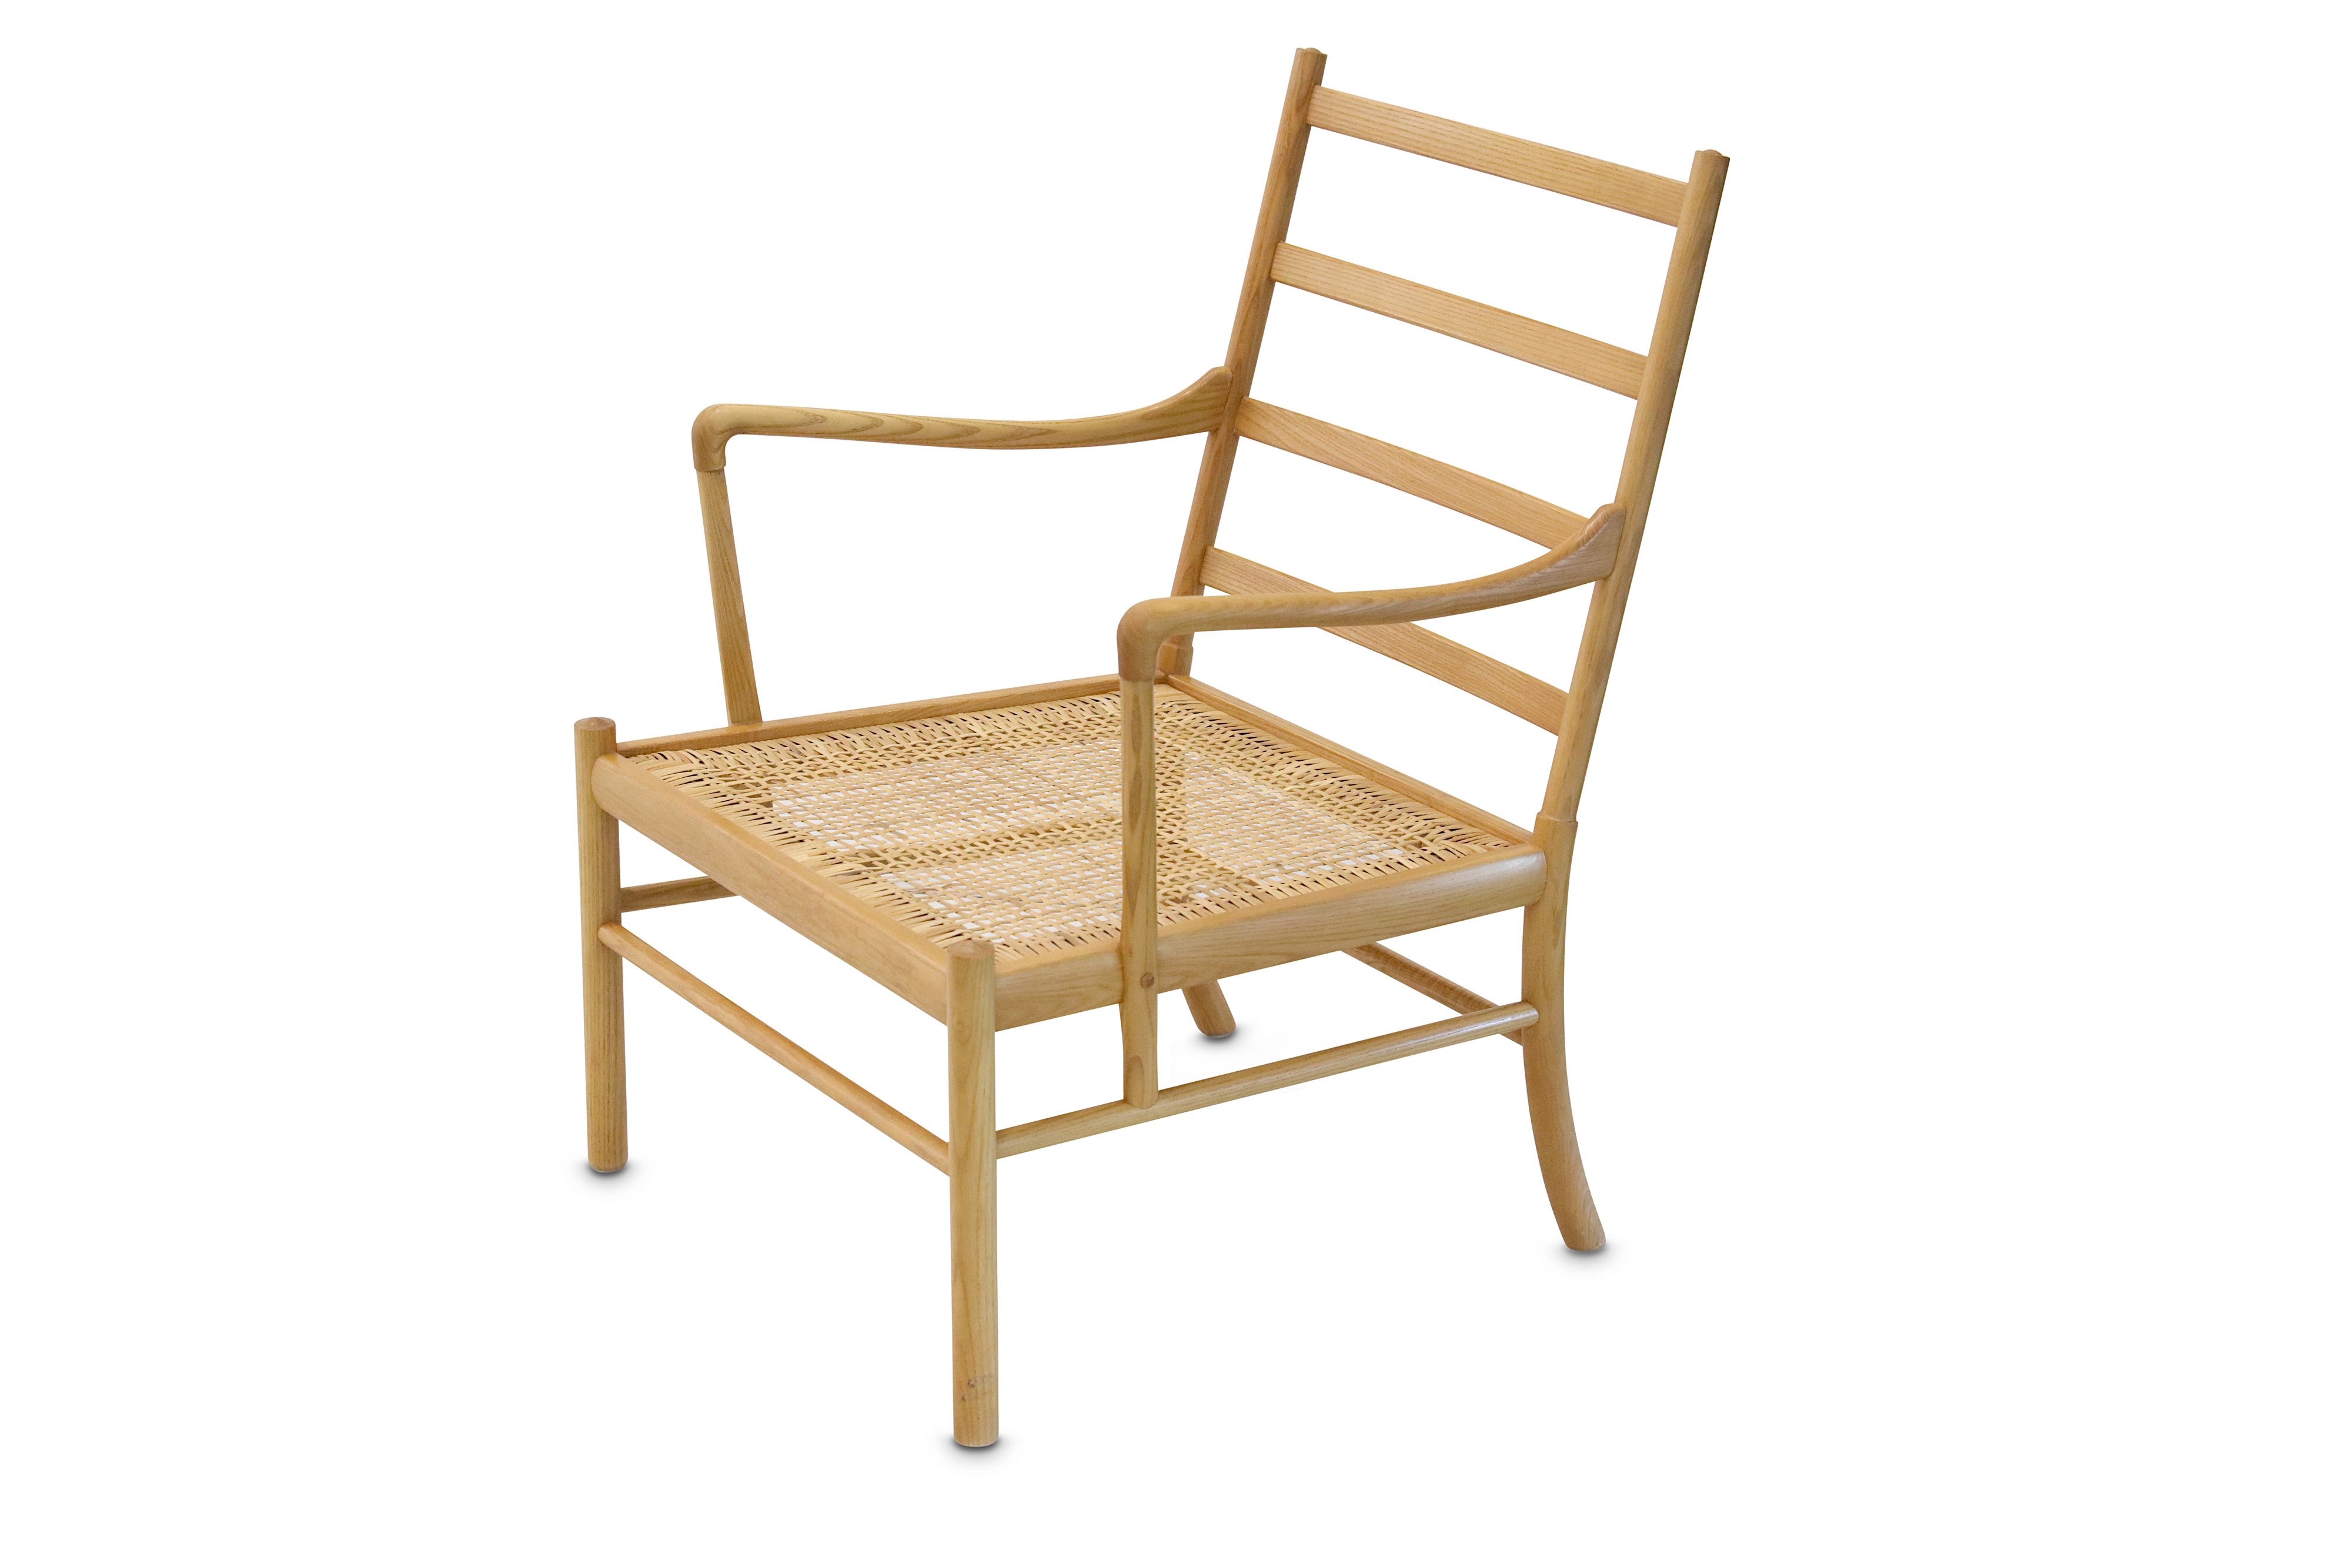 OLE WANSCHER: Colonial chair, designed 1949, for Peter Jeppesen - Image 2 of 2